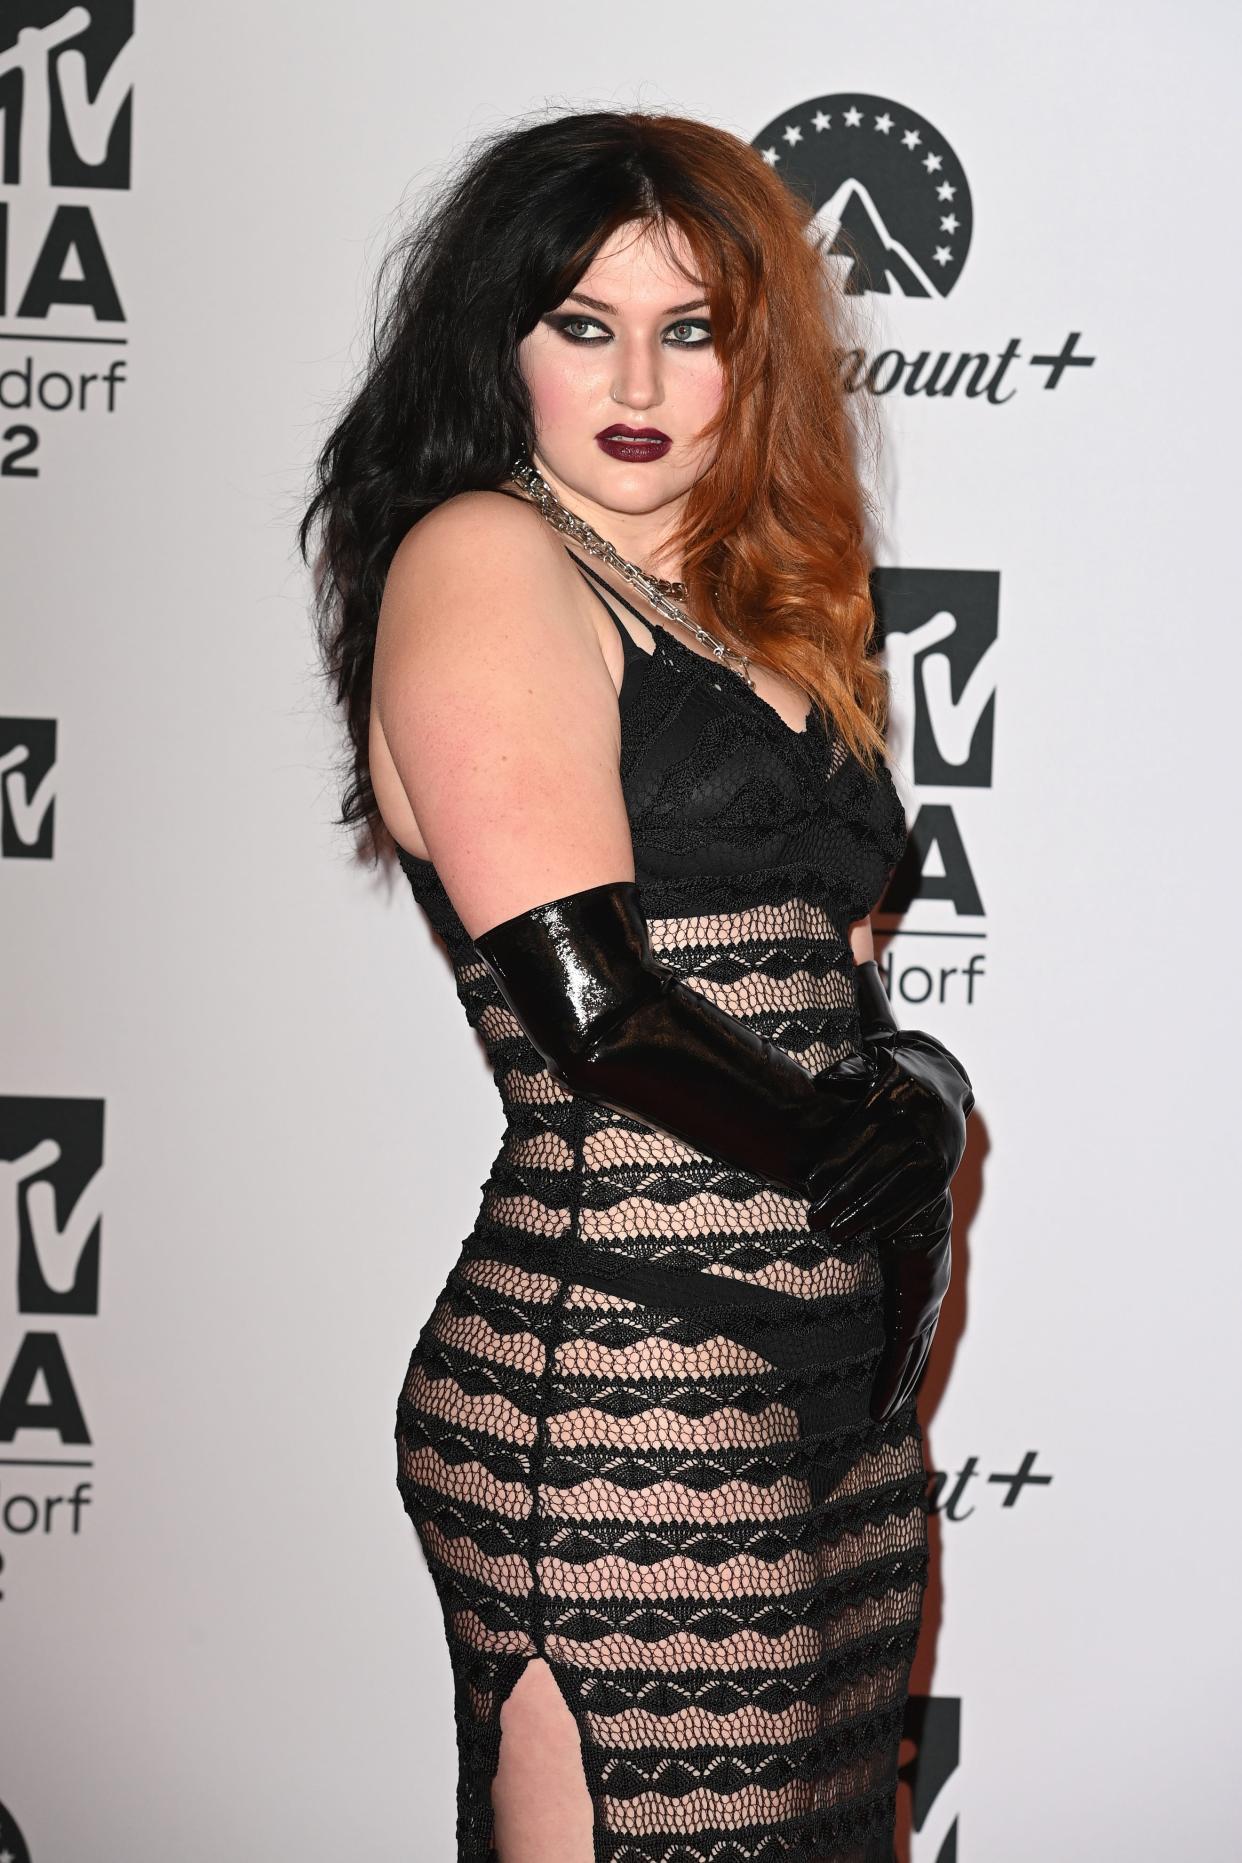 Taylor Gayle Rutherfurd aka Gayle attends the red carpet during the MTV Europe Music Awards 2022 held at PSD Bank Dome on November 13, 2022.